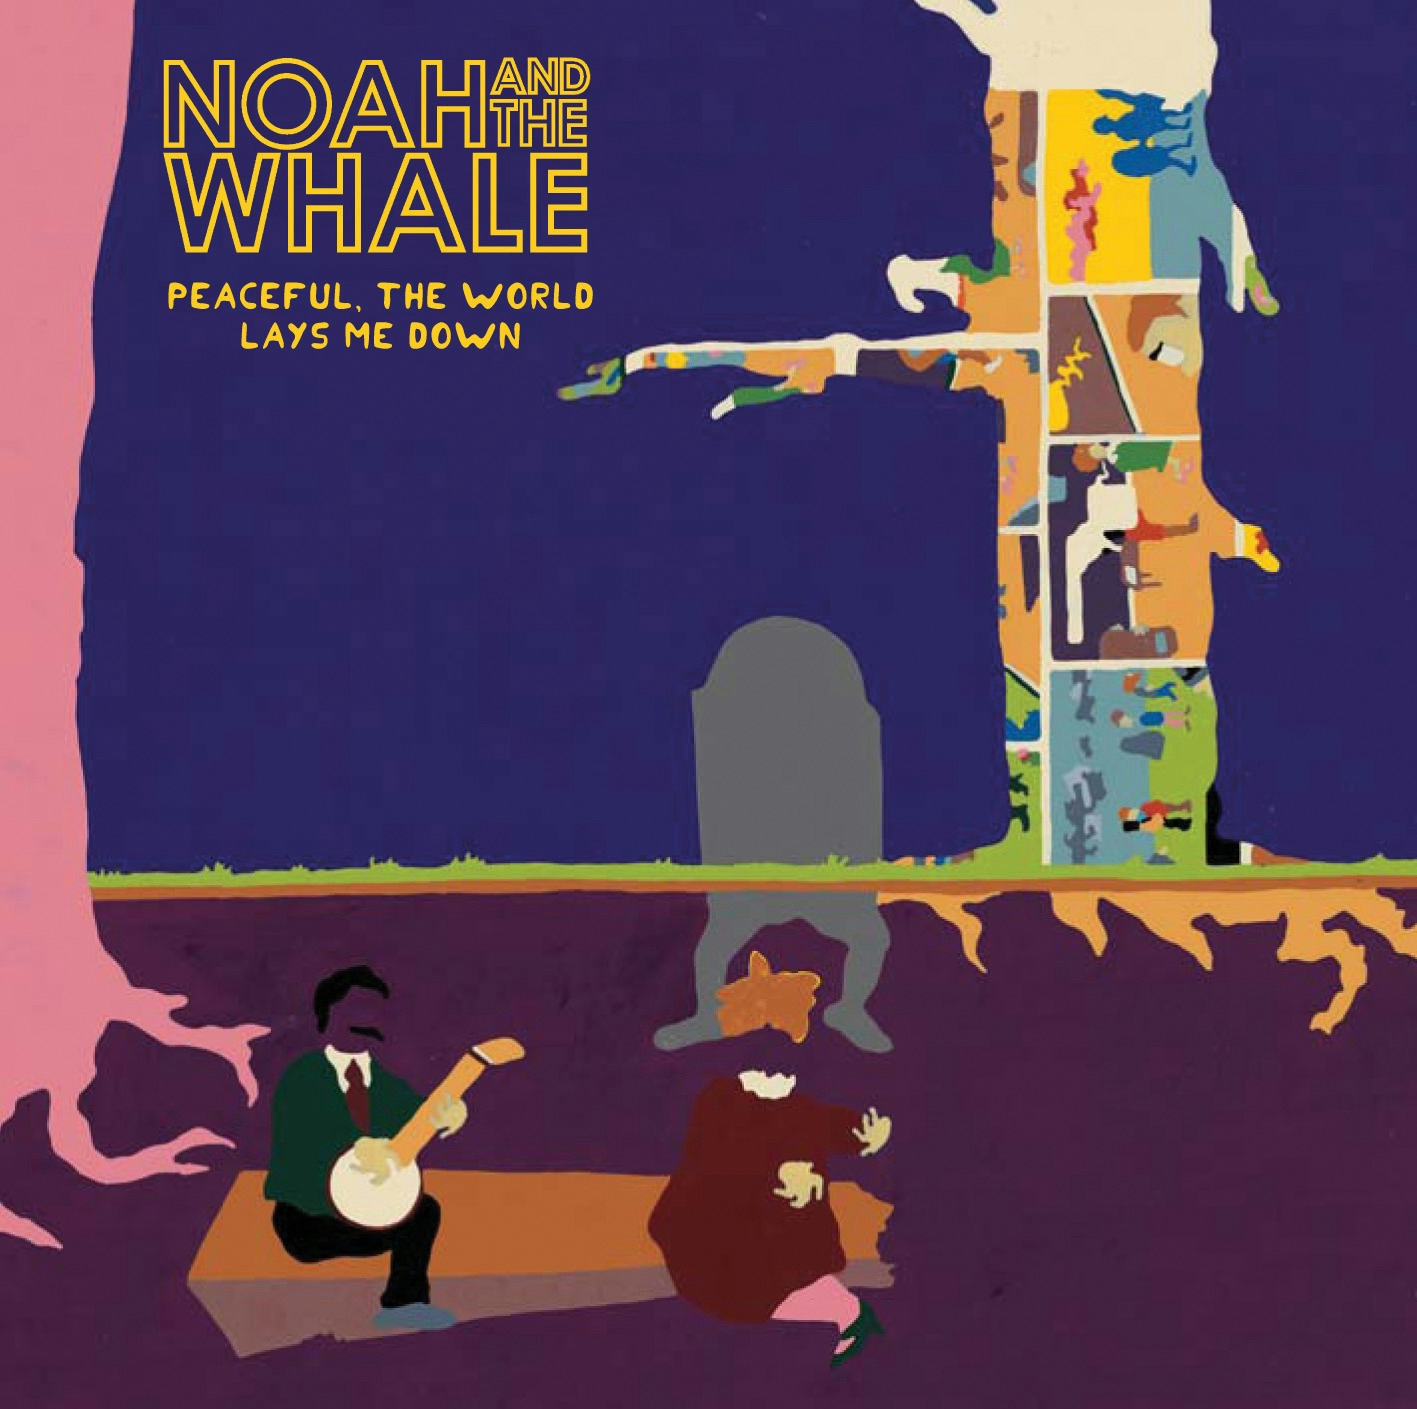 Album artwork for Album artwork for Peaceful, The World Lays Me Down by Noah and The Whale by Peaceful, The World Lays Me Down - Noah and The Whale